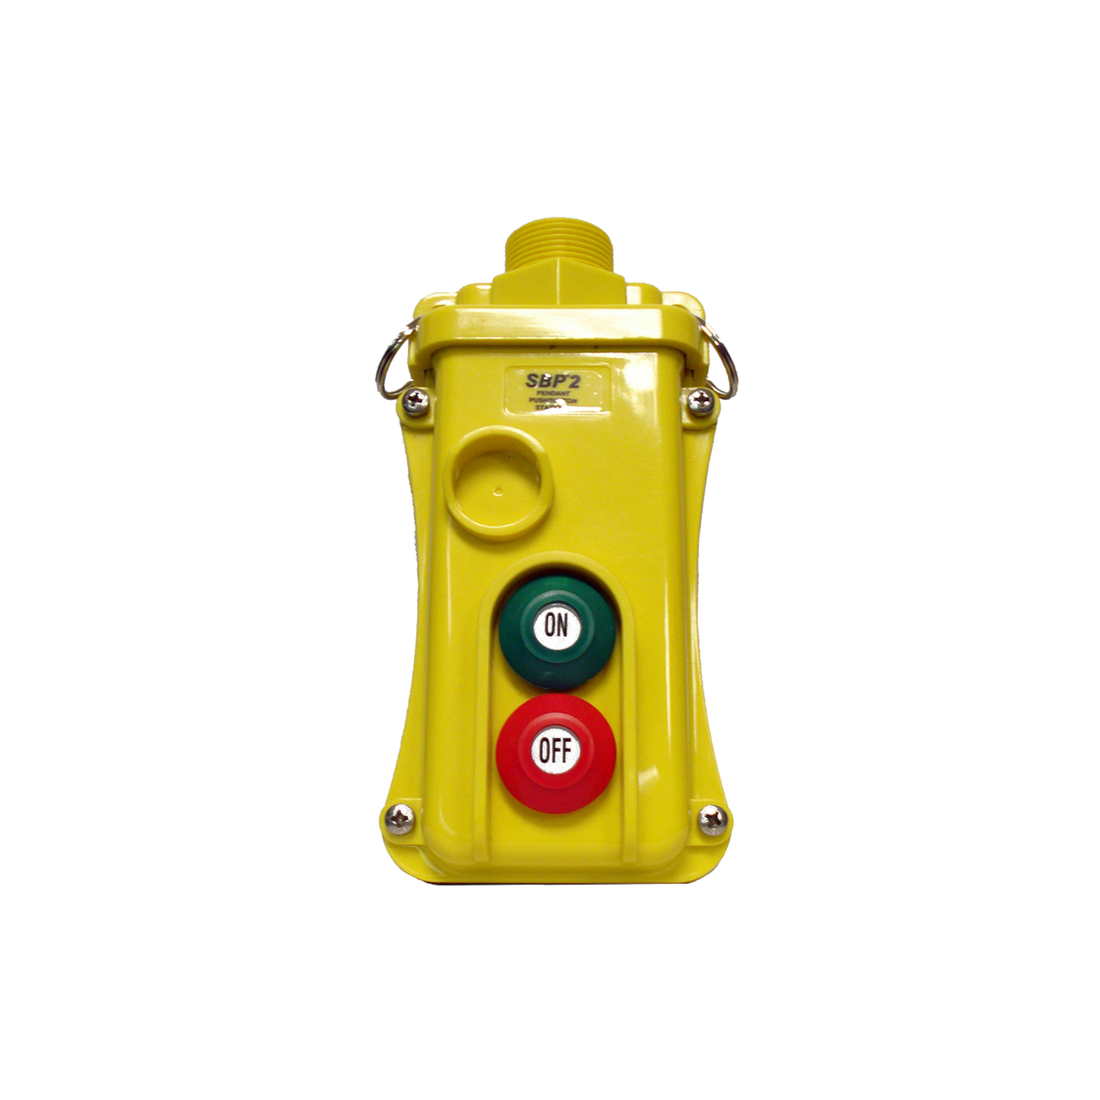 2-Button Pendant, Maintained & Momentary On/Off (SBP2-2-WB, SBP2-2-WH); Color: Yellow